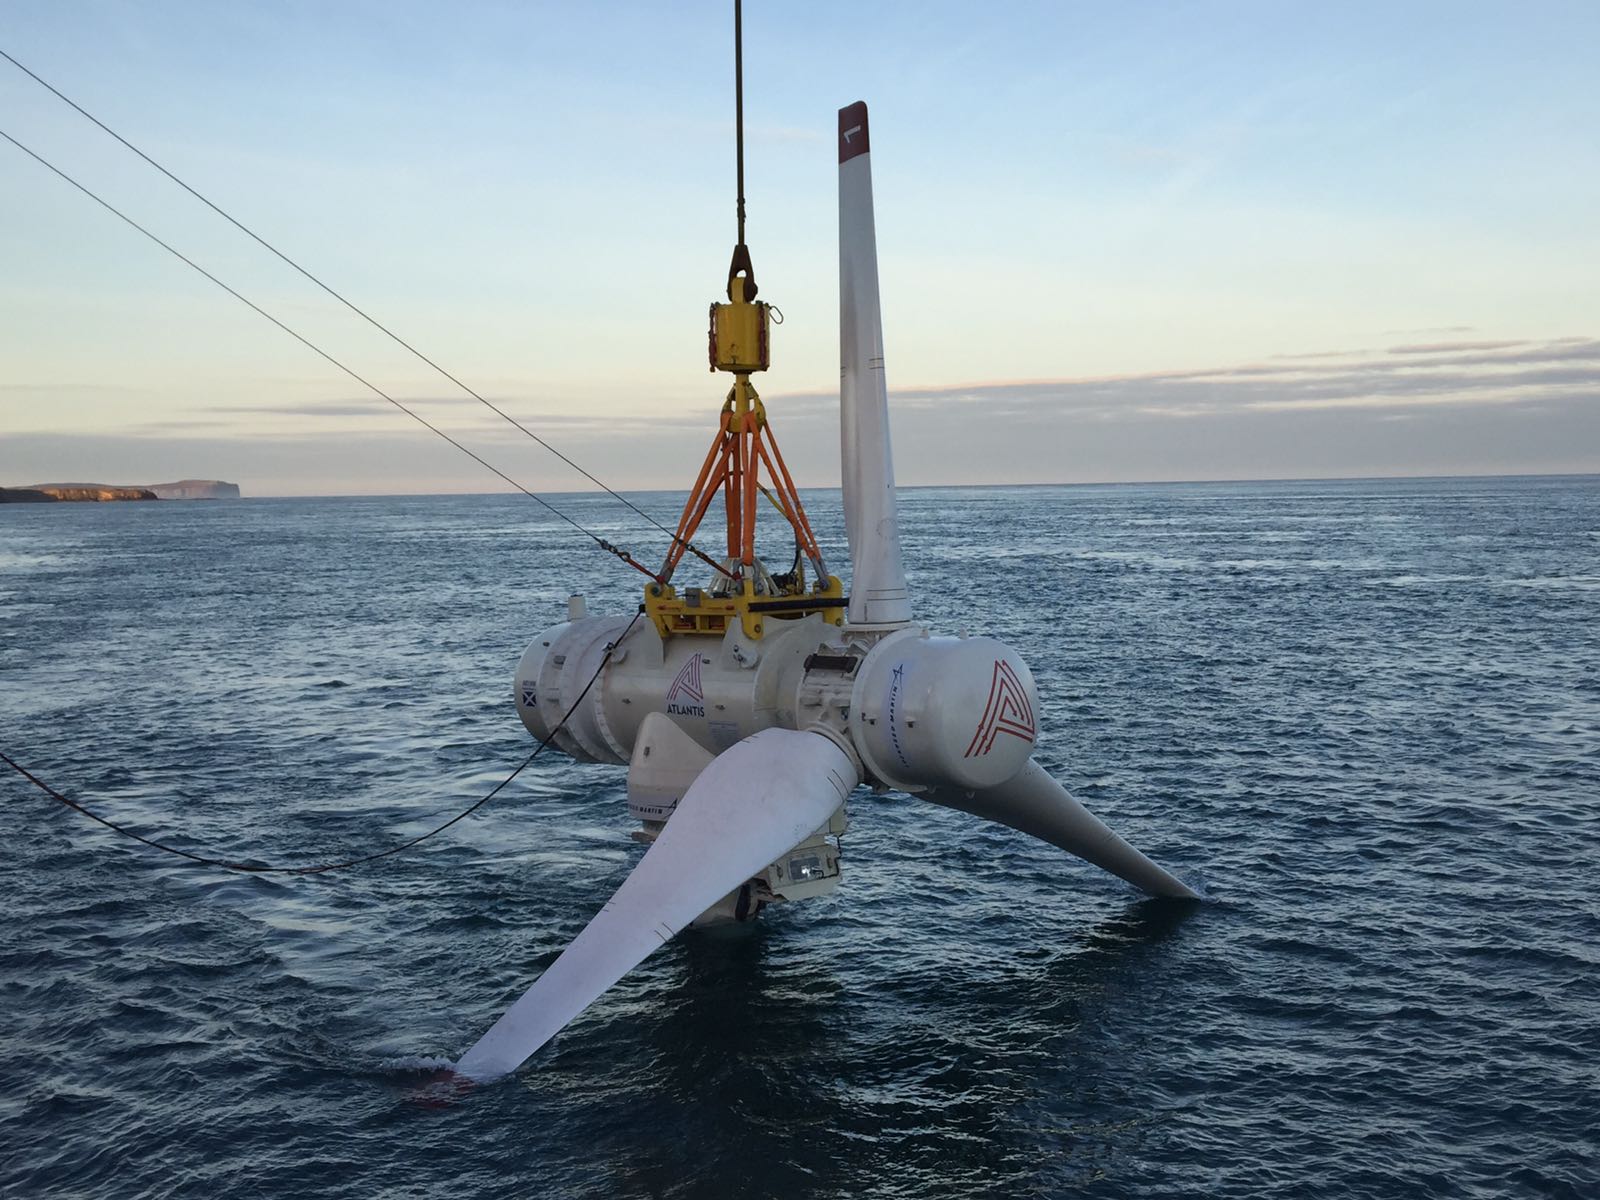 MeyGen Update - 4th turbine deployed and energised and growing interest in non-tidal activities